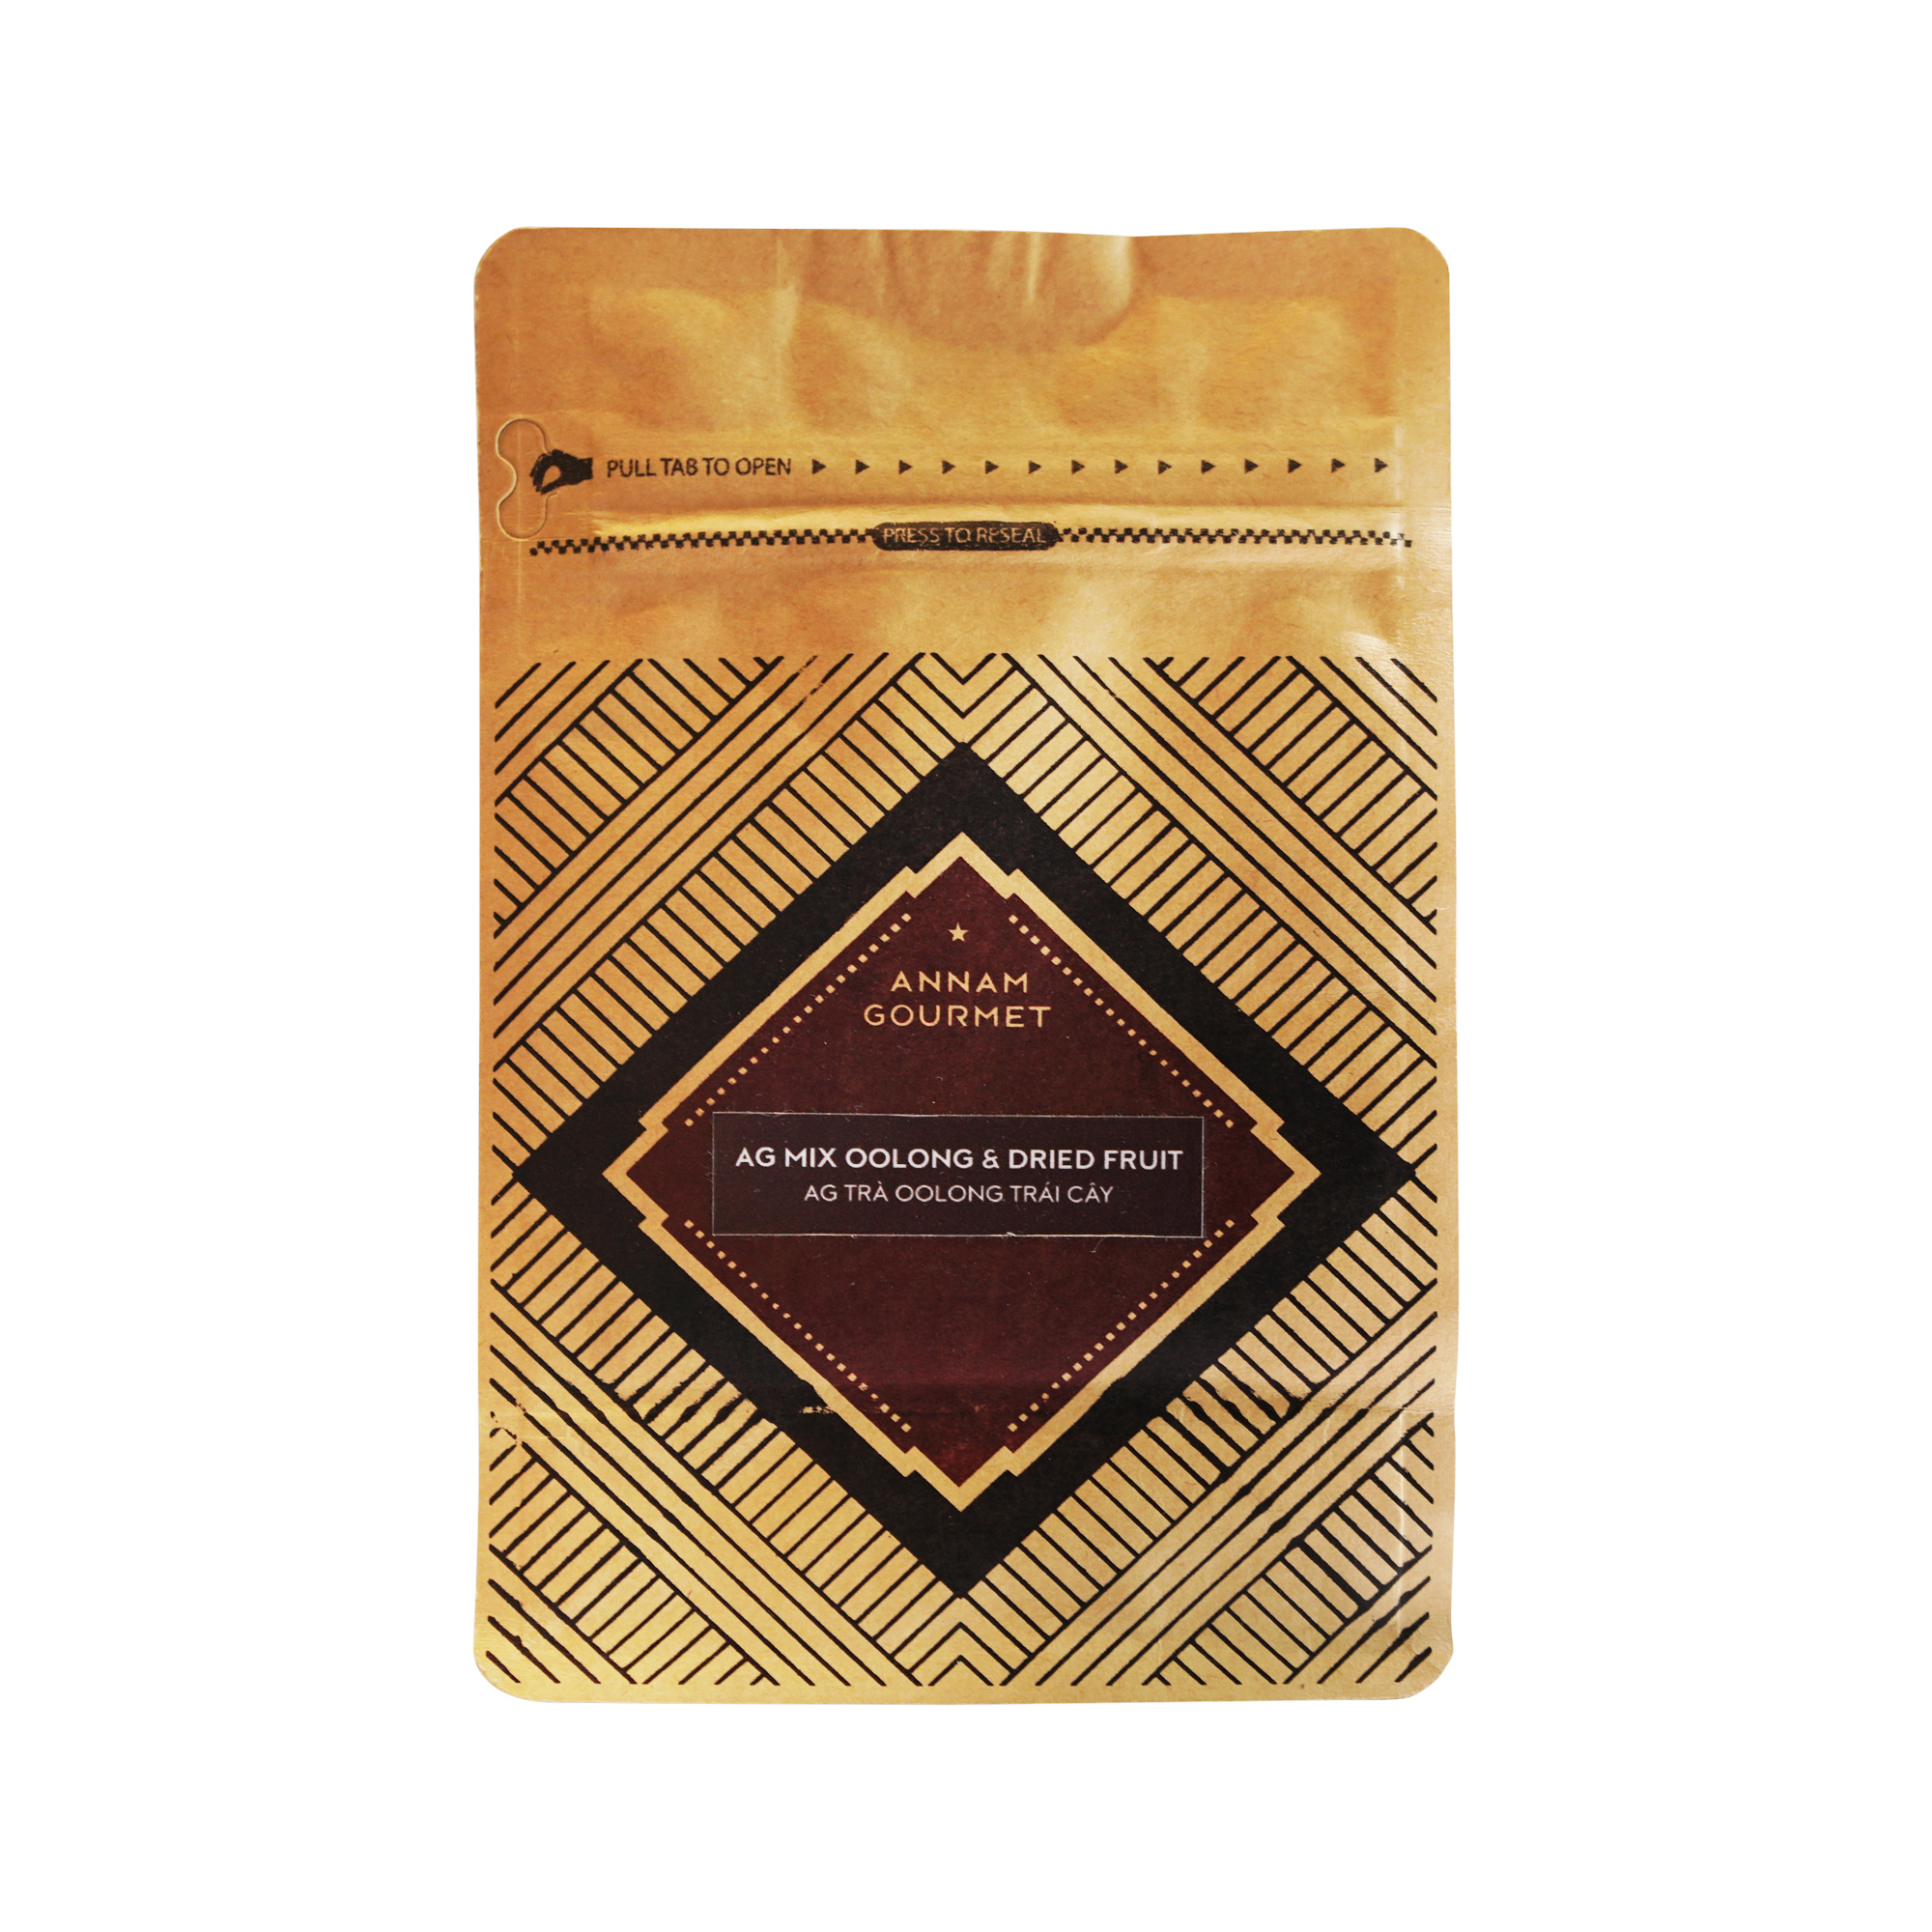 AG Signature Mix Oolong & Dried Fruit (100g)